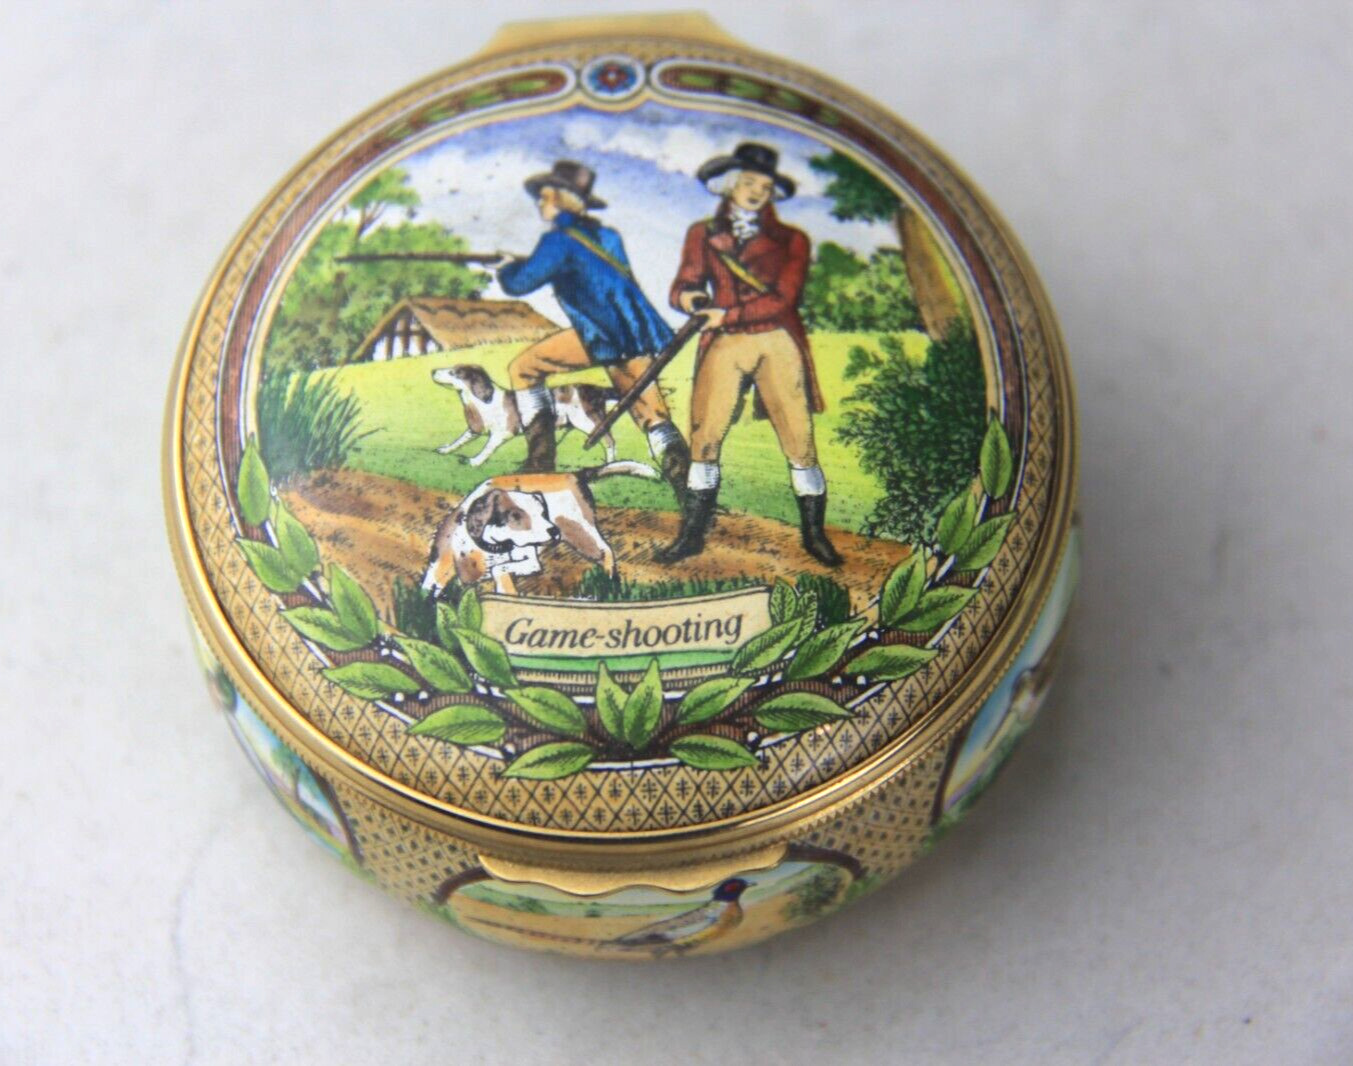 Halcyon Days “Game Shooting” Enamel Box Commissioned by James Purdey & Son